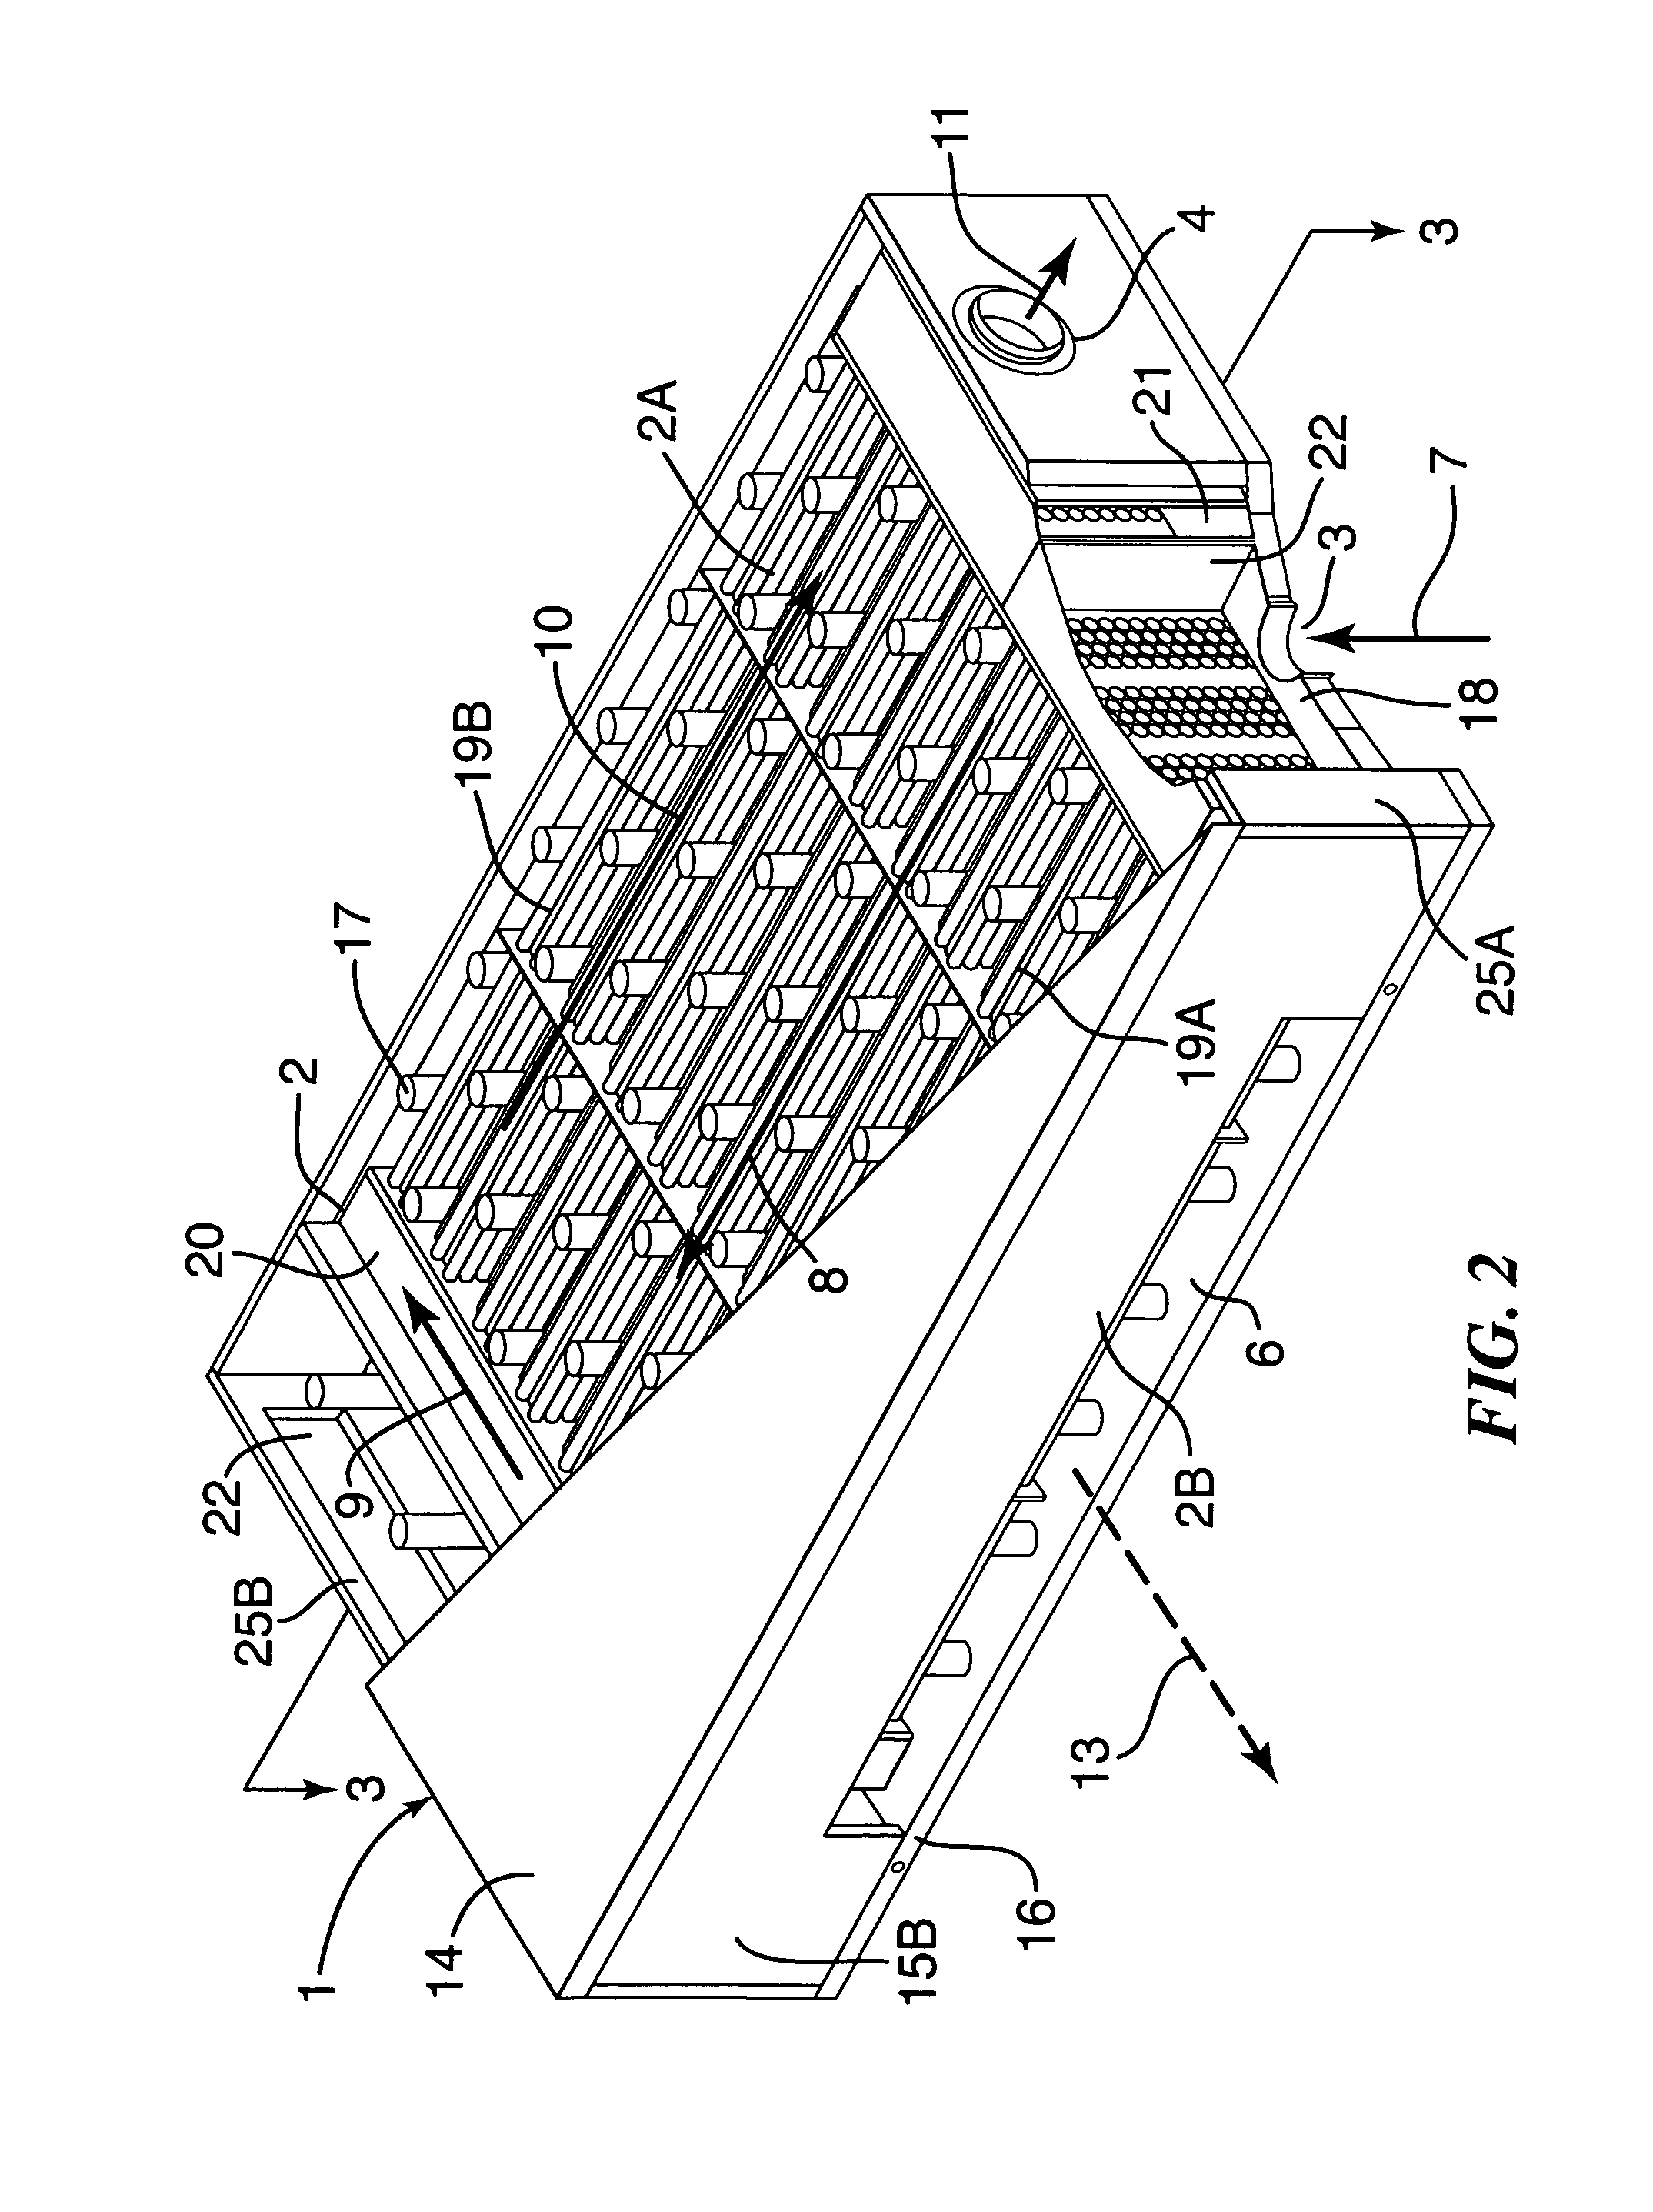 Fuel cell end unit with integrated heat exchanger